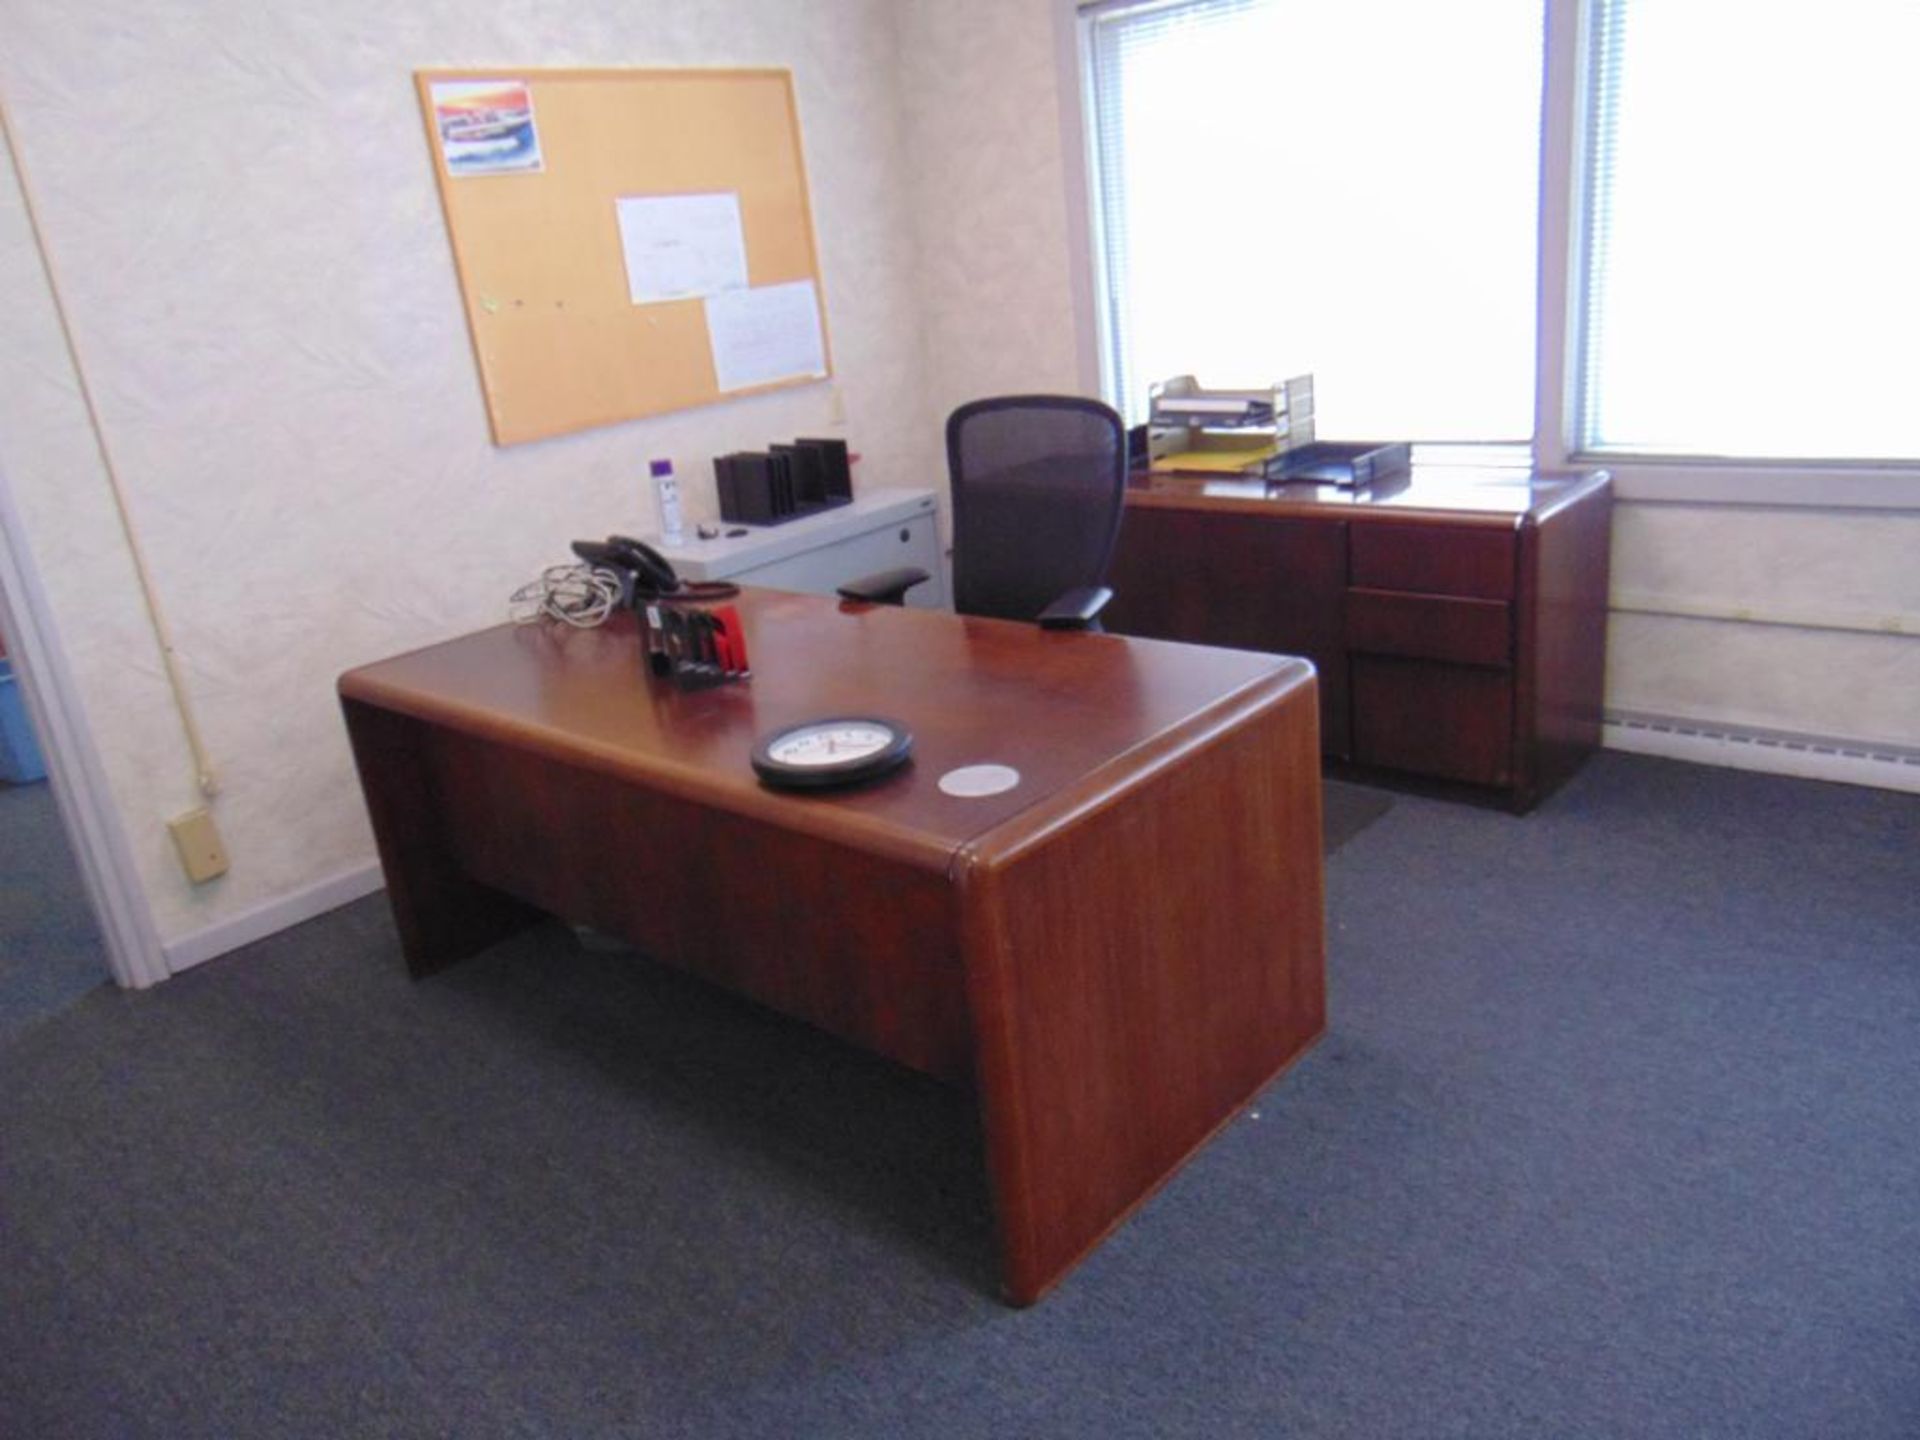 2 Offices and Contents*